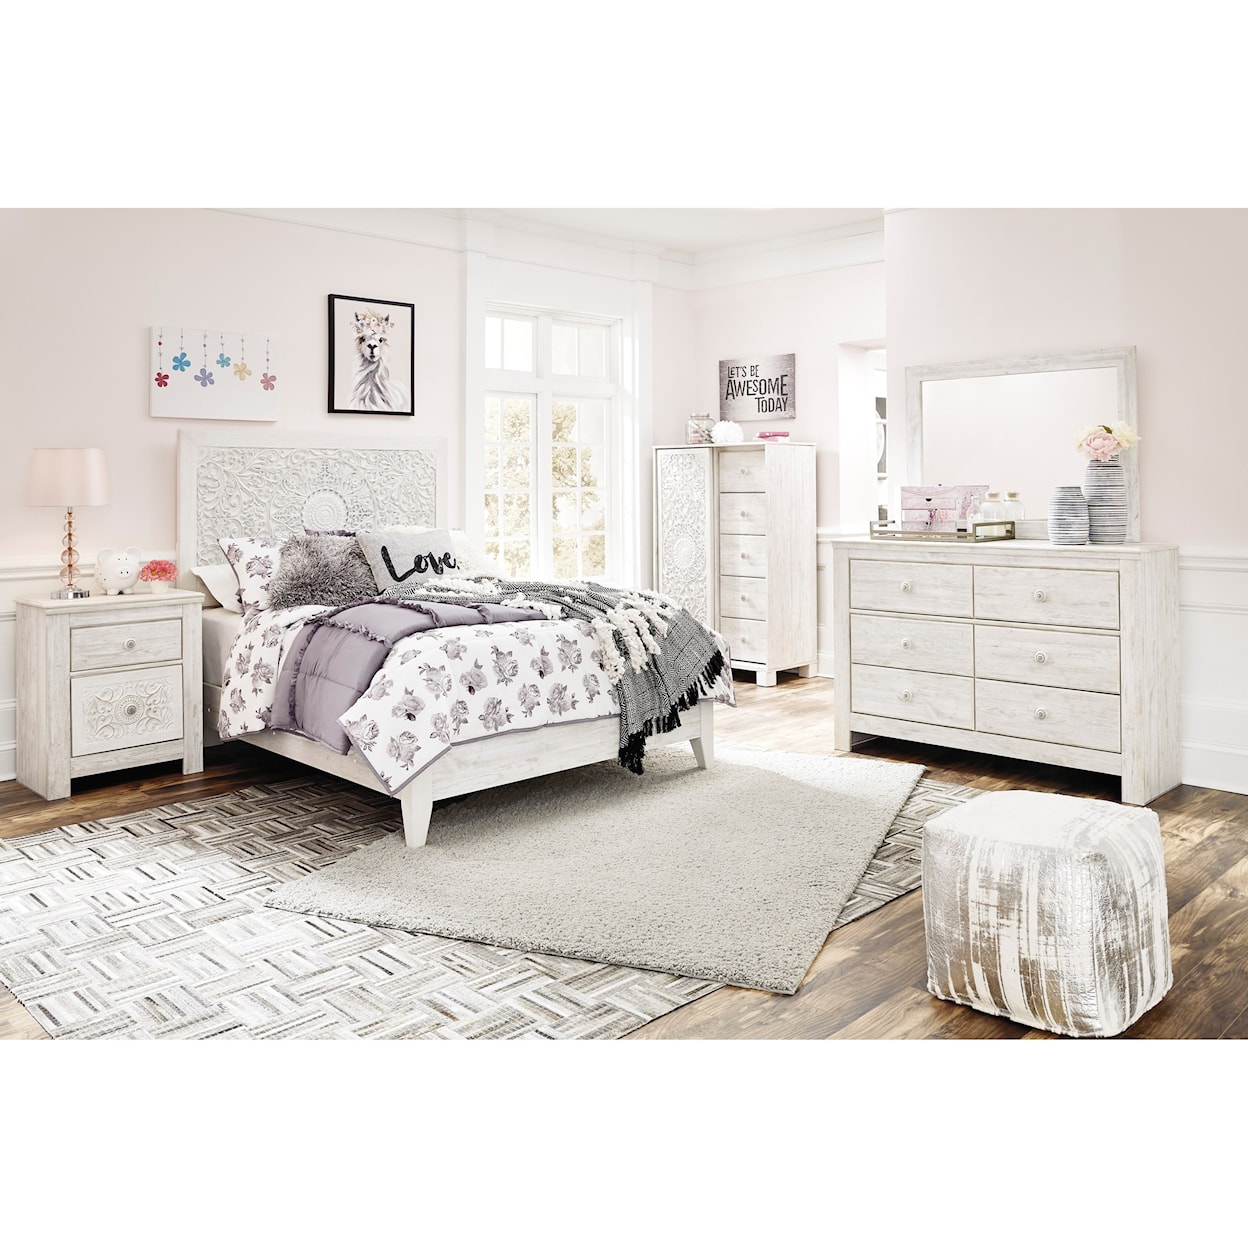 Signature Design by Ashley Paxberry 5 Piece Twin Bedroom Set